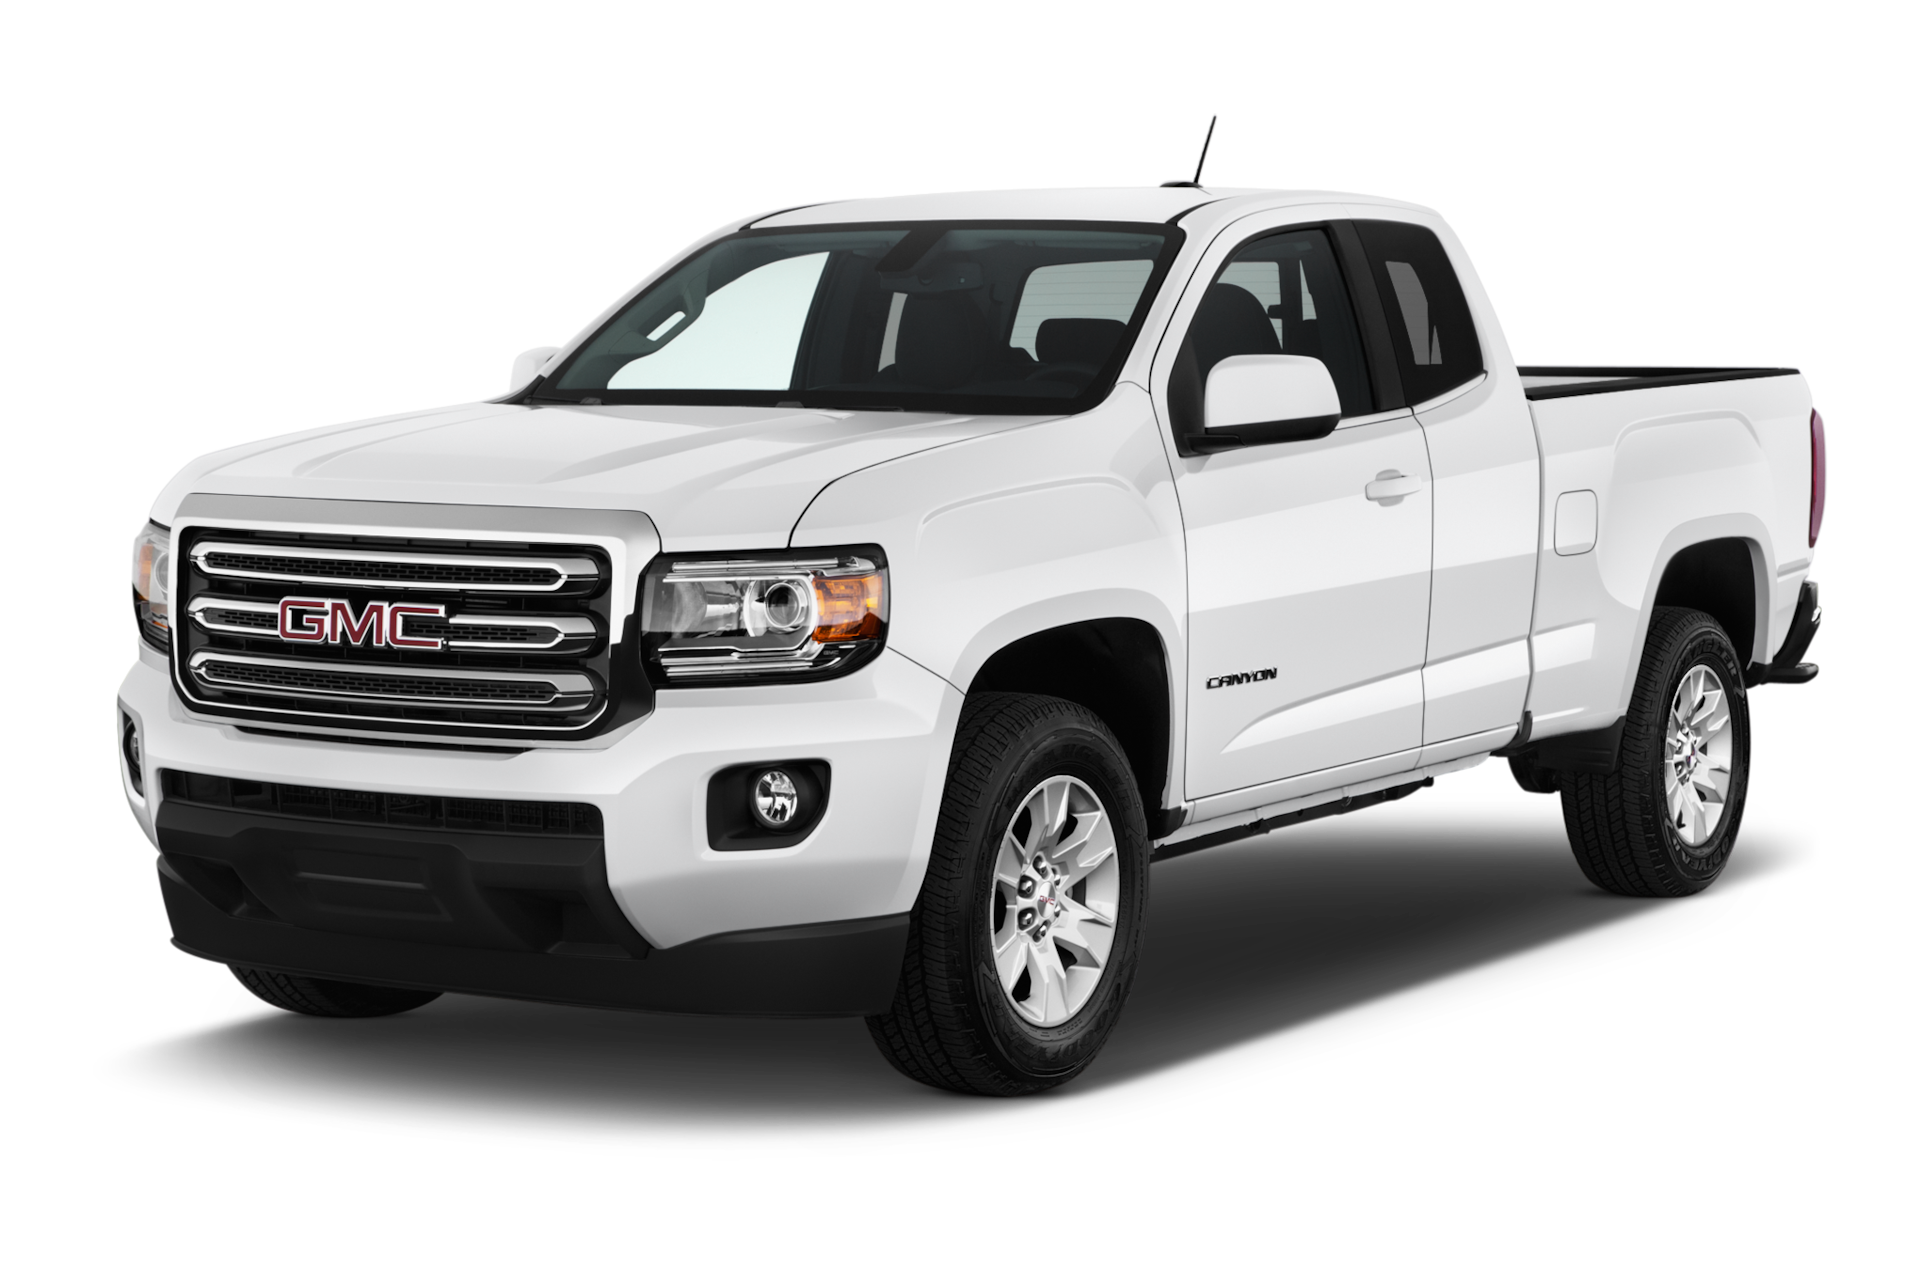 2017 GMC Canyon Prices, Reviews, and Photos - MotorTrend